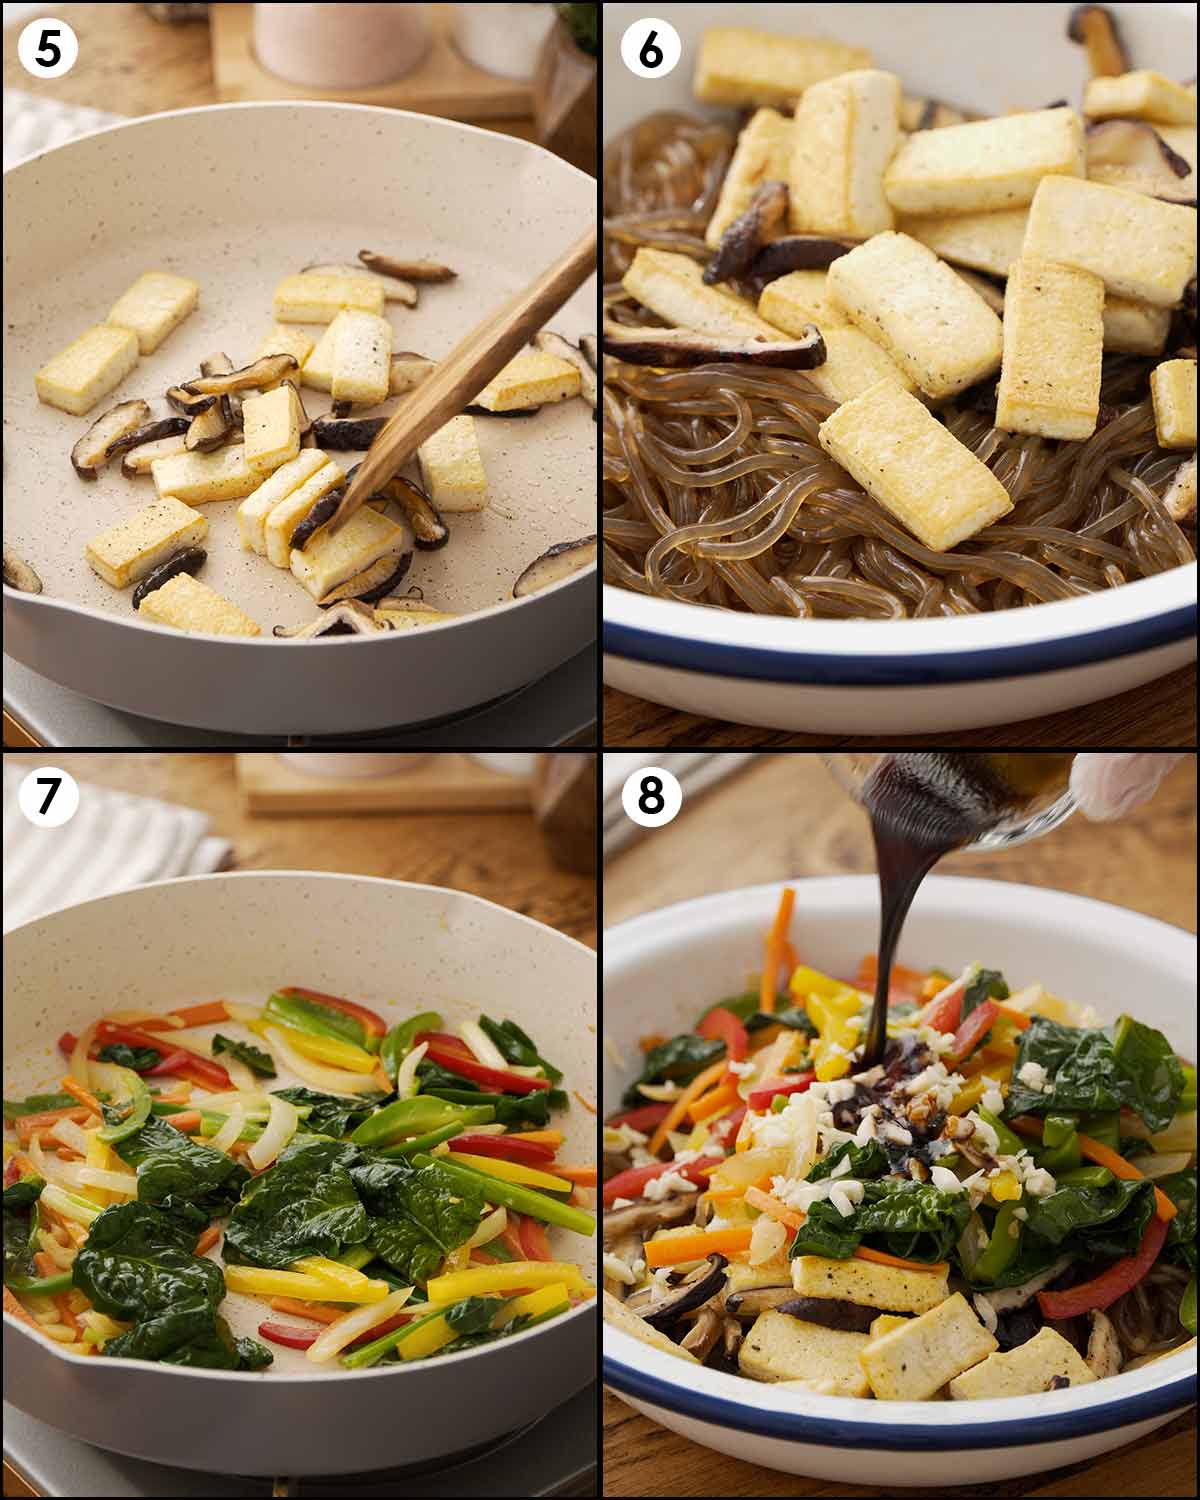 4 image collage showing how to stir fry tofu, vegetables, and how combine with the sweet potato noodles and sauce mix. 